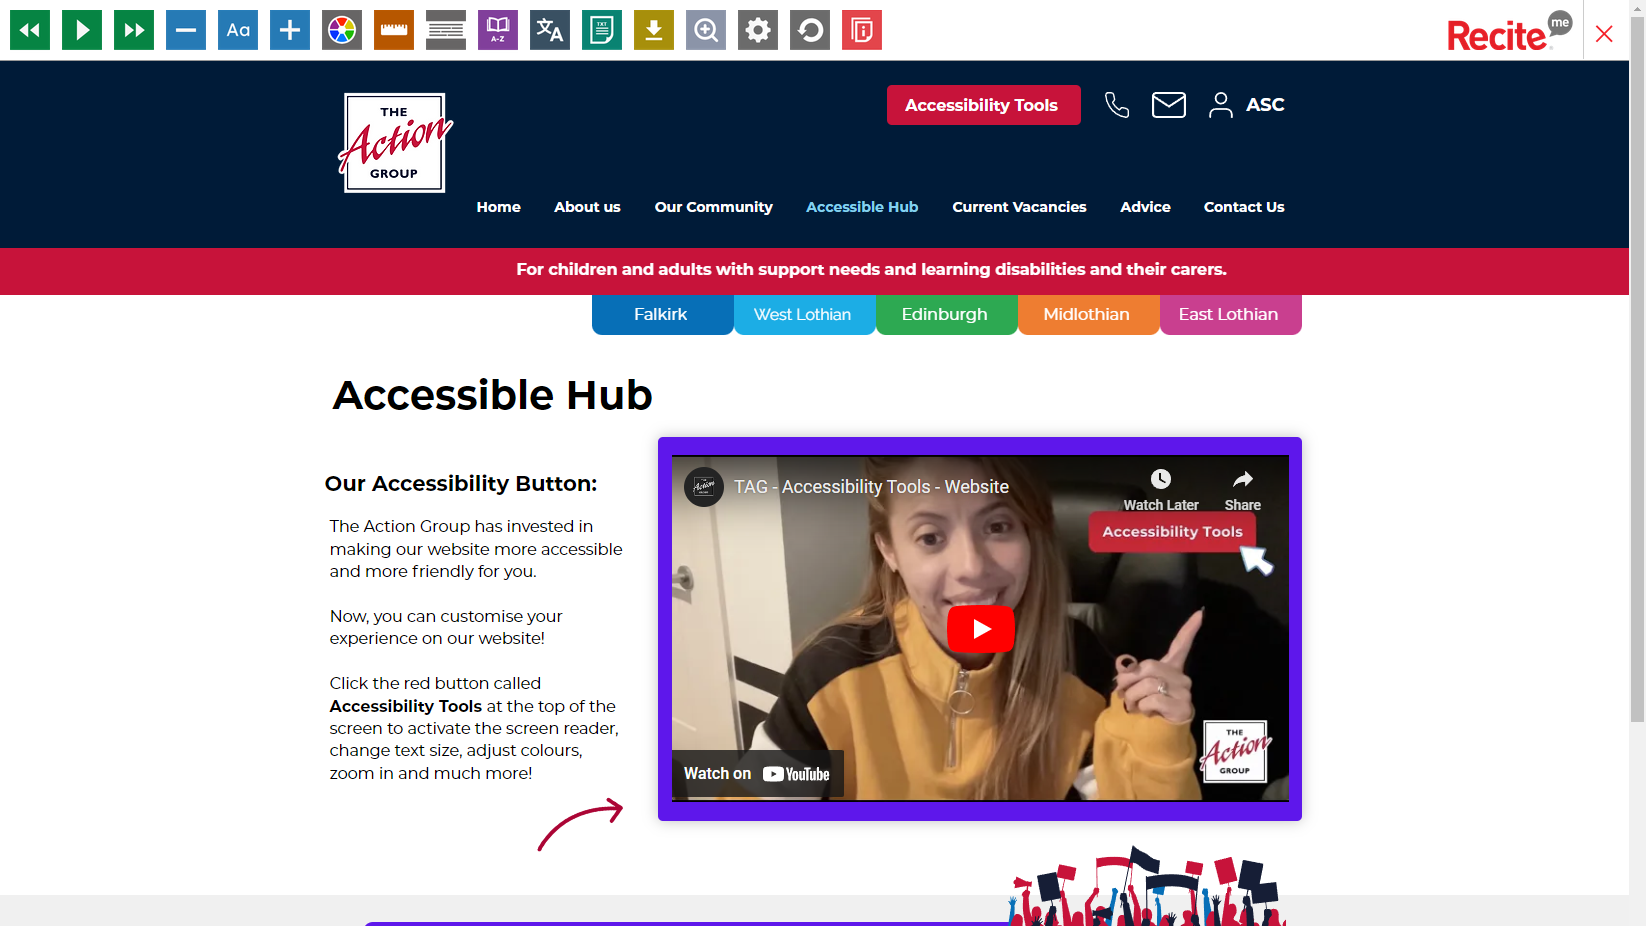 A screenshot of the Accessible hub page on the action group's website showing the accessibility tools available on the website including Recite Me